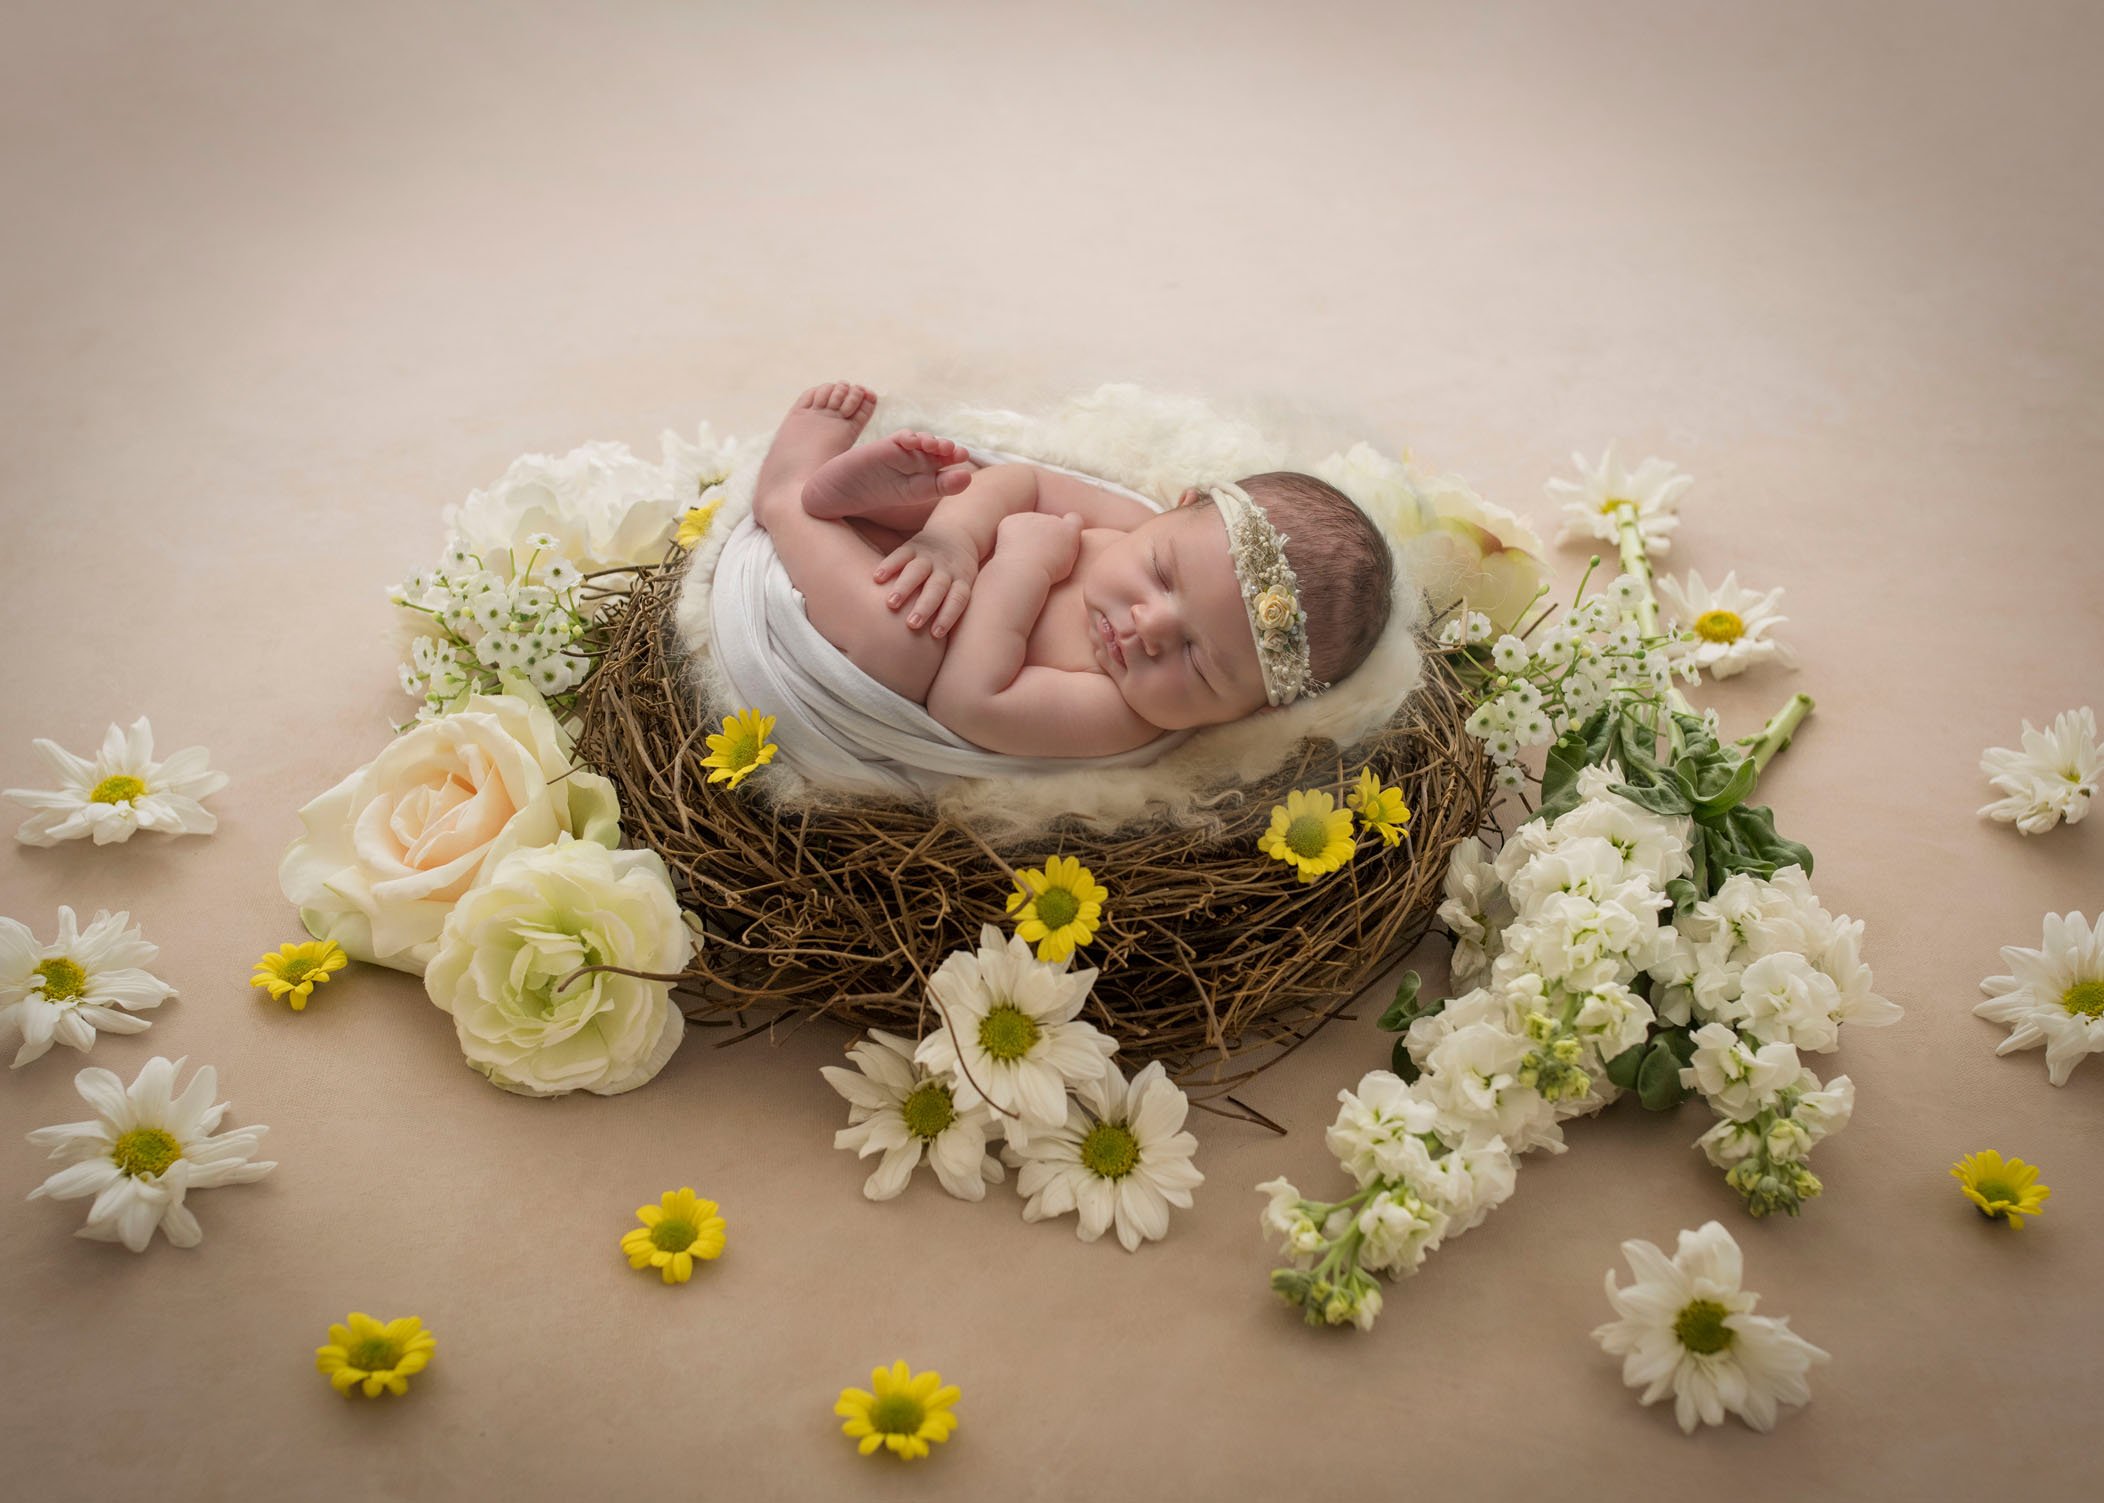 newborn baby girl sleeping in grape vine wreath surrounded by scattered spring flowers